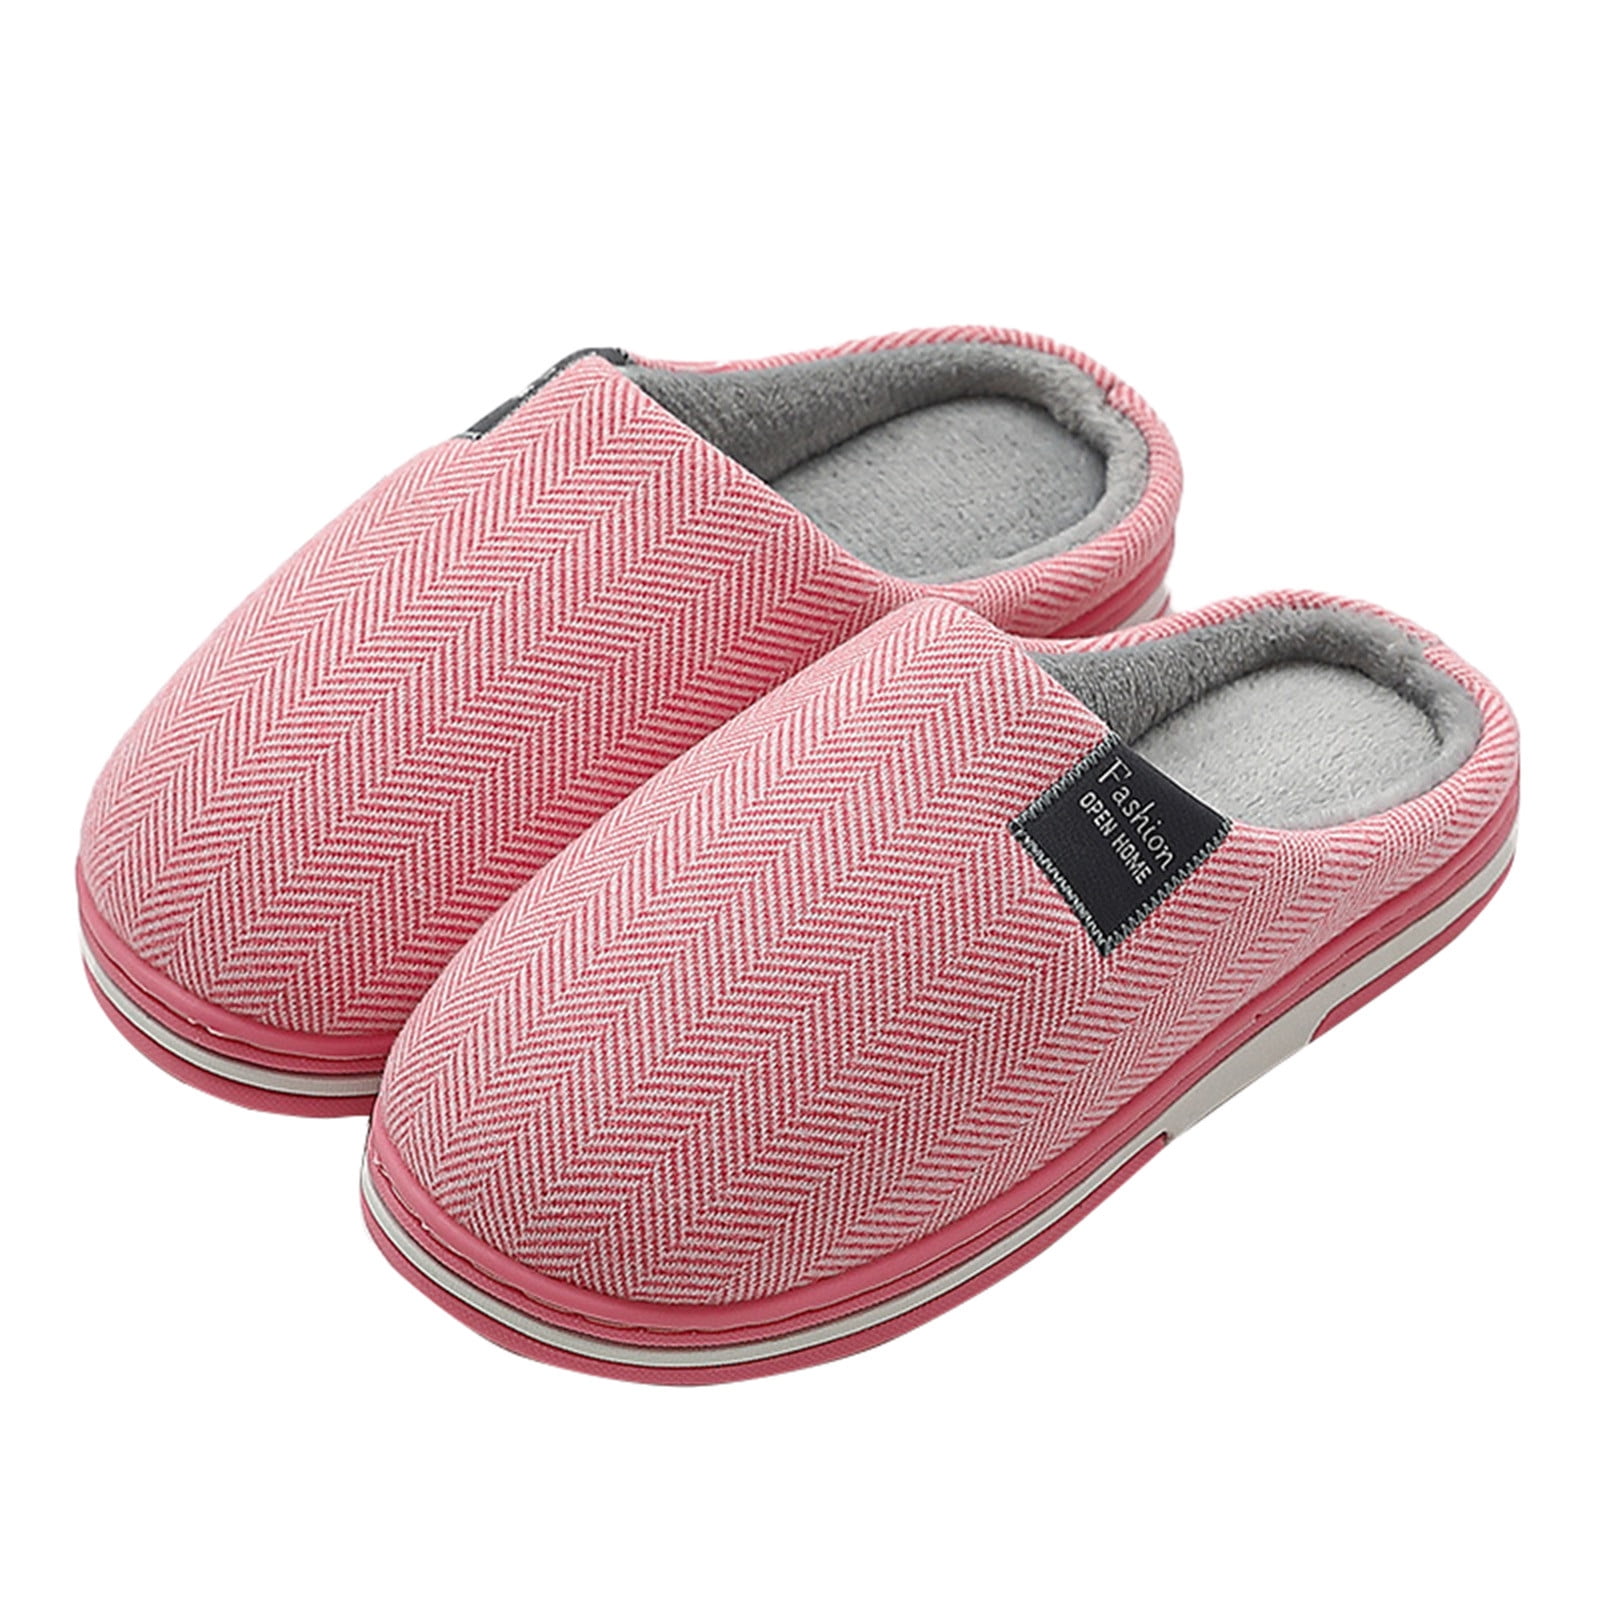 JDEFEG Soft Sole Slippers for Women Shoes Men's Soft-Soled Indoor Slippers  Warm Women's Home Shoes Cotton Women's Slipper Slippers for Women Extra